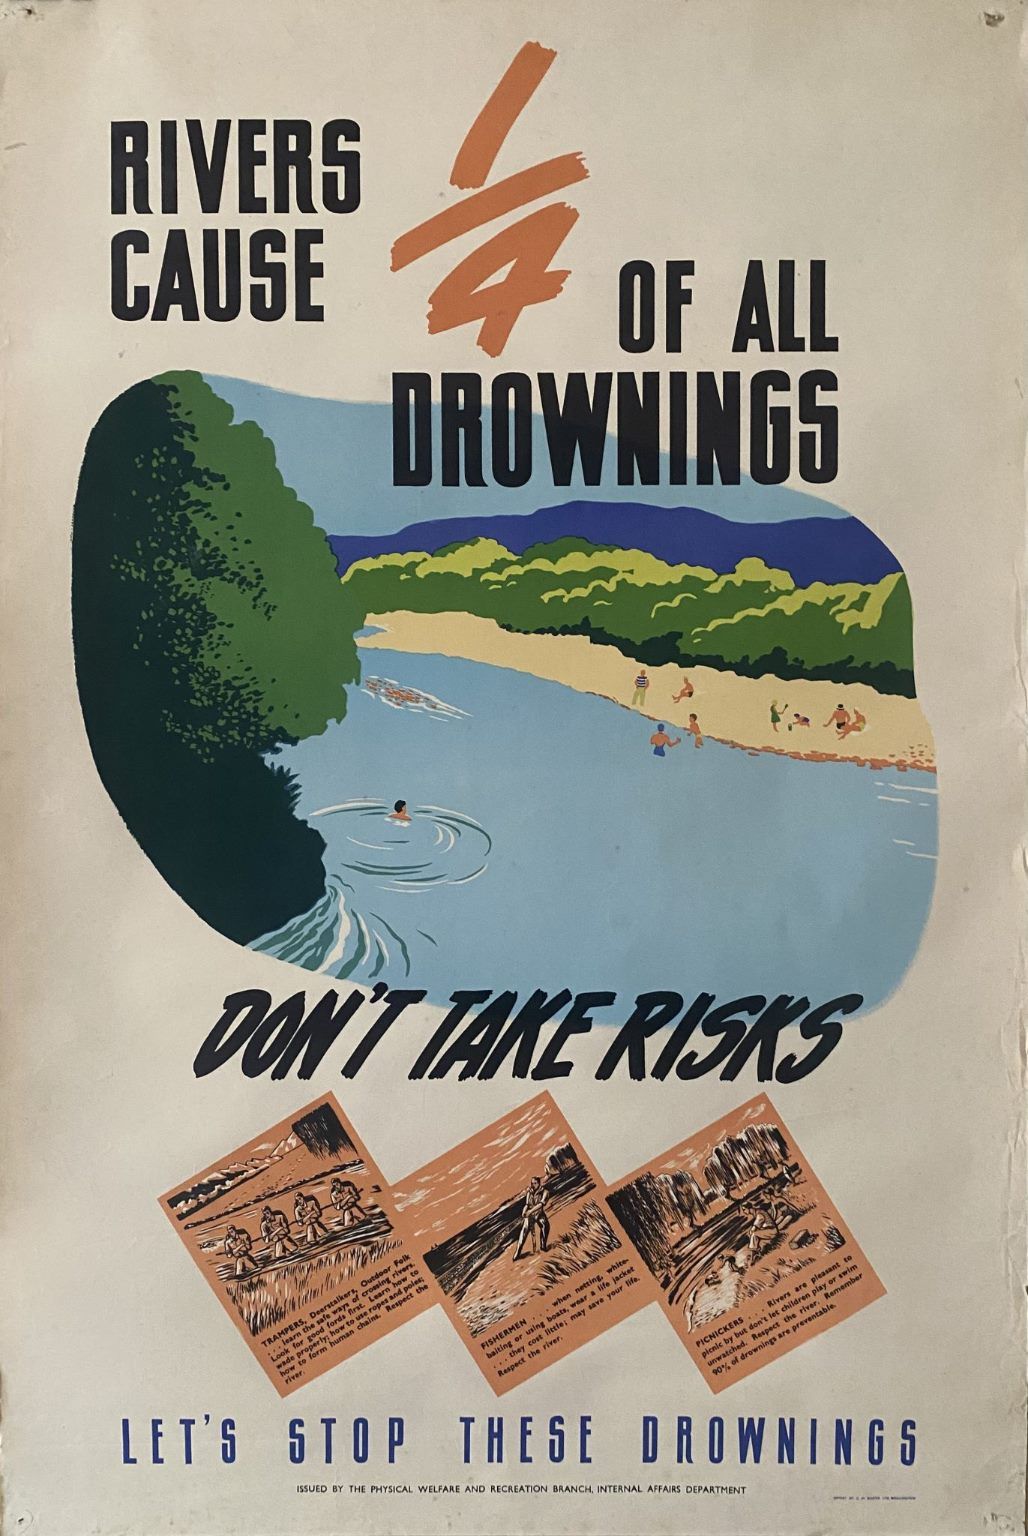 VINTAGE POSTER: Water Safety Around Rivers / Drowning Prevention 1950s